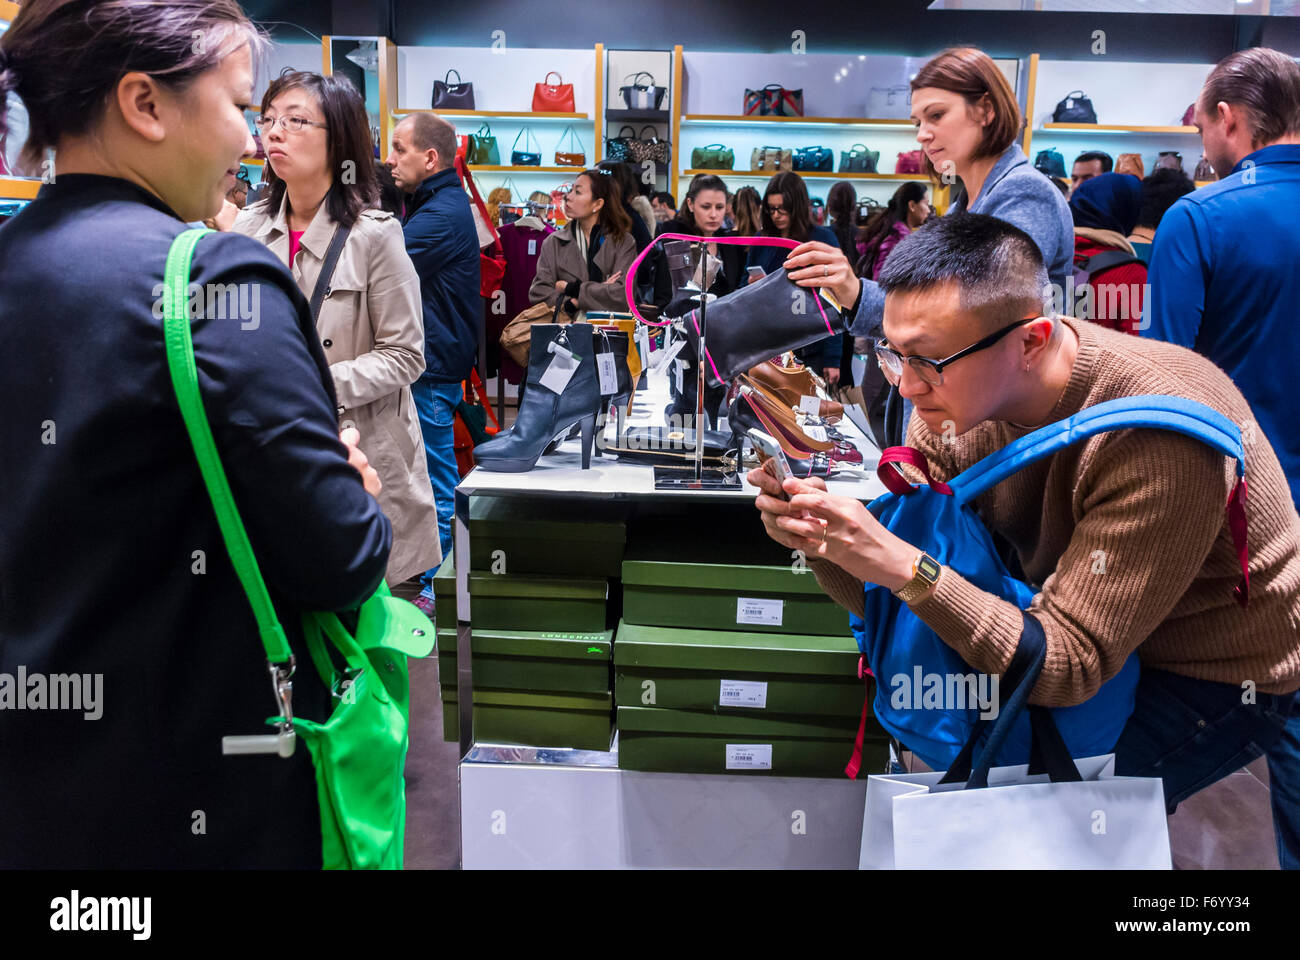 Paris Suburbs, France, Crowd of People Shopping in Outlet Shopping Mall, Centre commercial, 'La Valleé Village', 'Marne-la Vallée' Longchamp Bags, Chinese man taking pictures, Using Iphone, paris chinese community Stock Photo